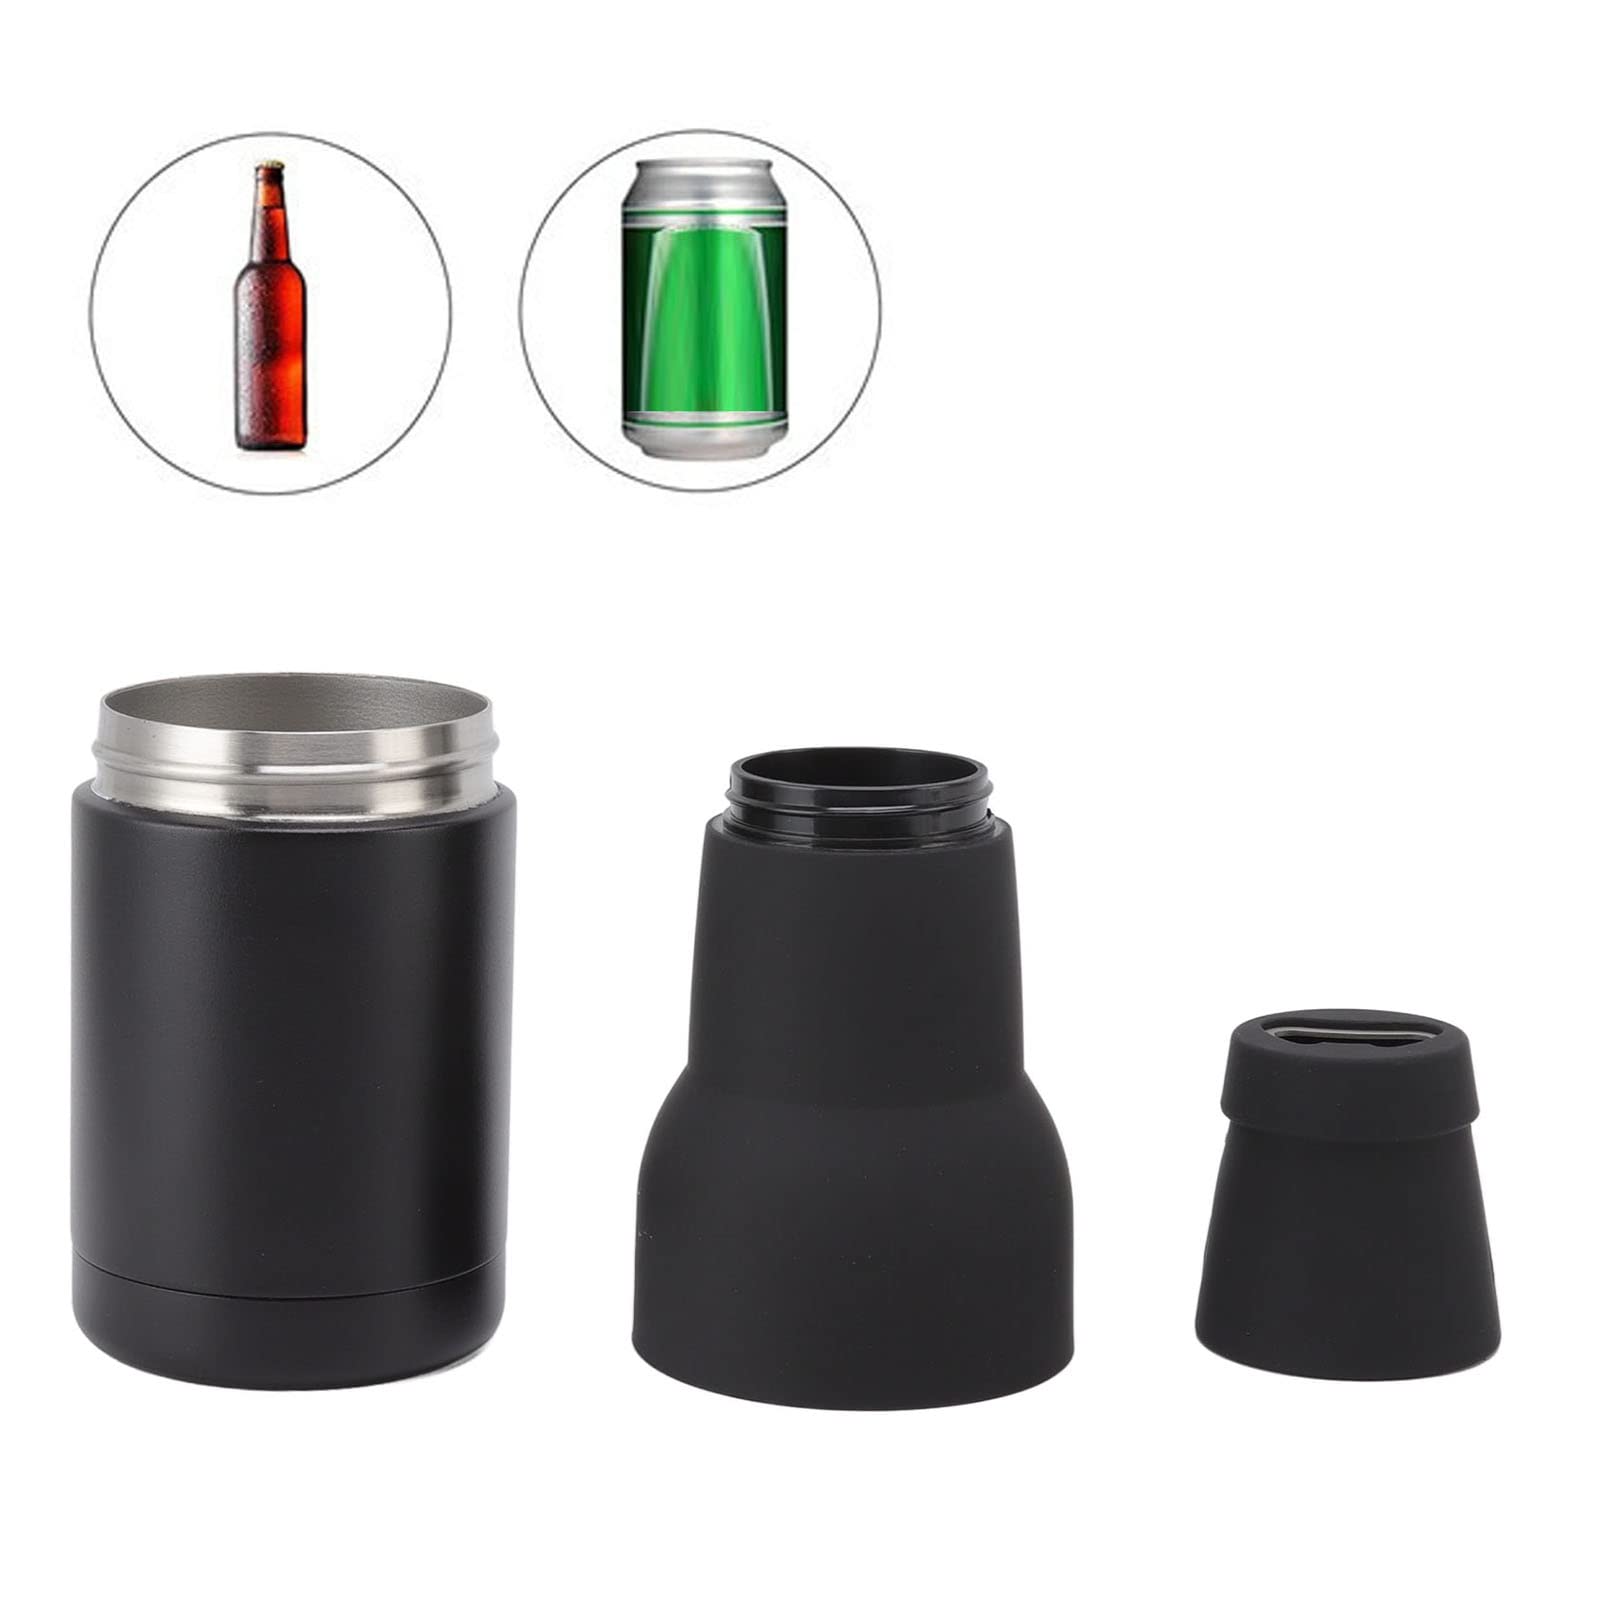 340ml Beer Cooler with Bottle Opener, Stainless Steel Beer and Soda Can Bottle Cooler, Drink Carrier, Can and Bottle Sleeve Helps Keep Drink Cold(304 Stainless Steel, ABS)